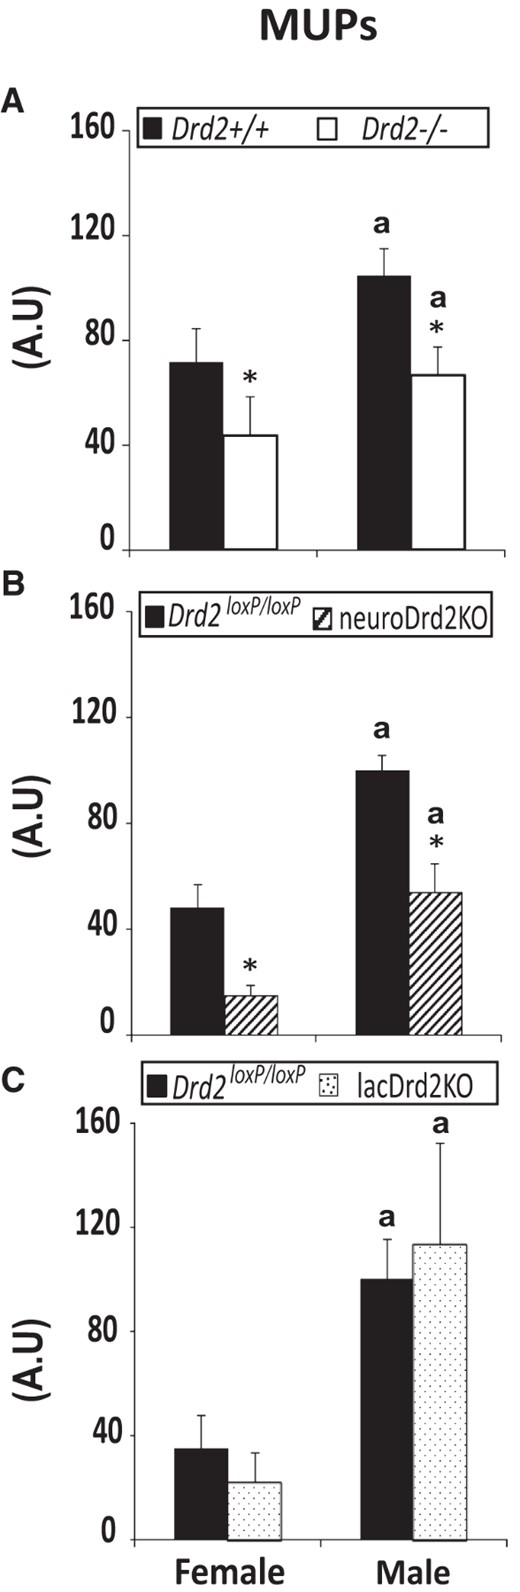 Urine MUP excretion in adult female and male Drd2−/− (A), neuroDrd2KO (B), and lacDrd2KO mice (C), and their respective controls. Urine samples taken from male and female male Drd2−/−, neuroDrd2KO, and lacDrd2KO mice, and their respective controls (n = 9–18) were analyzed by SDS-PAGE electrophoresis. The 20-kDa band was quantified by densitometry for each urine sample and expressed in arbitrary units (A.U.). a, P < .05 vs genotype-matched females; *, P < .05 vs sex-matched control (Drd2+/+ or Drd2loxP/loxP mice).